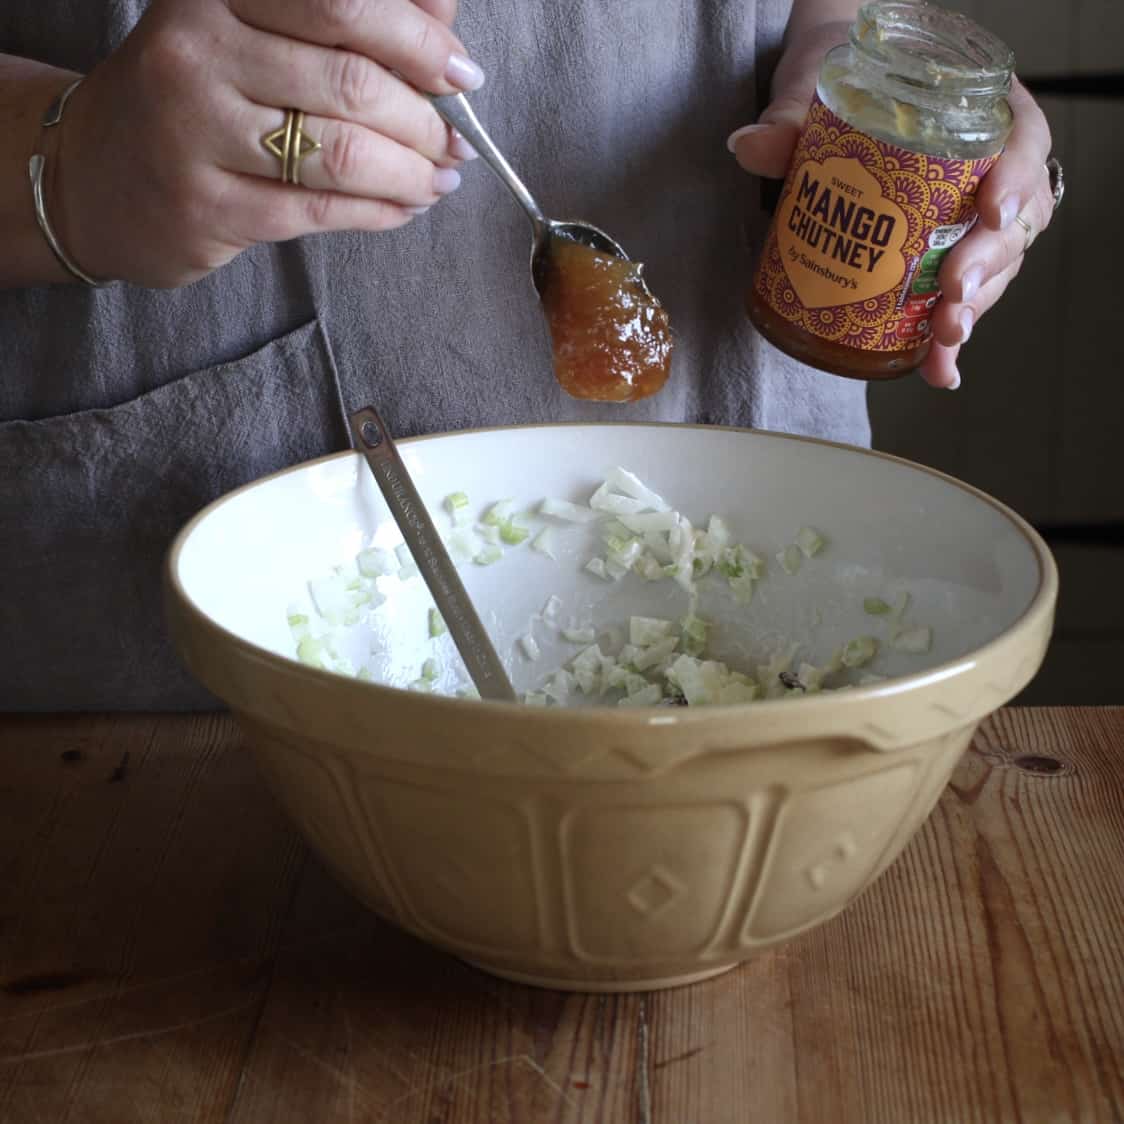 Woman dropping a spoonful of mango chutney into a brown mixing bowl from a silver teaspoon